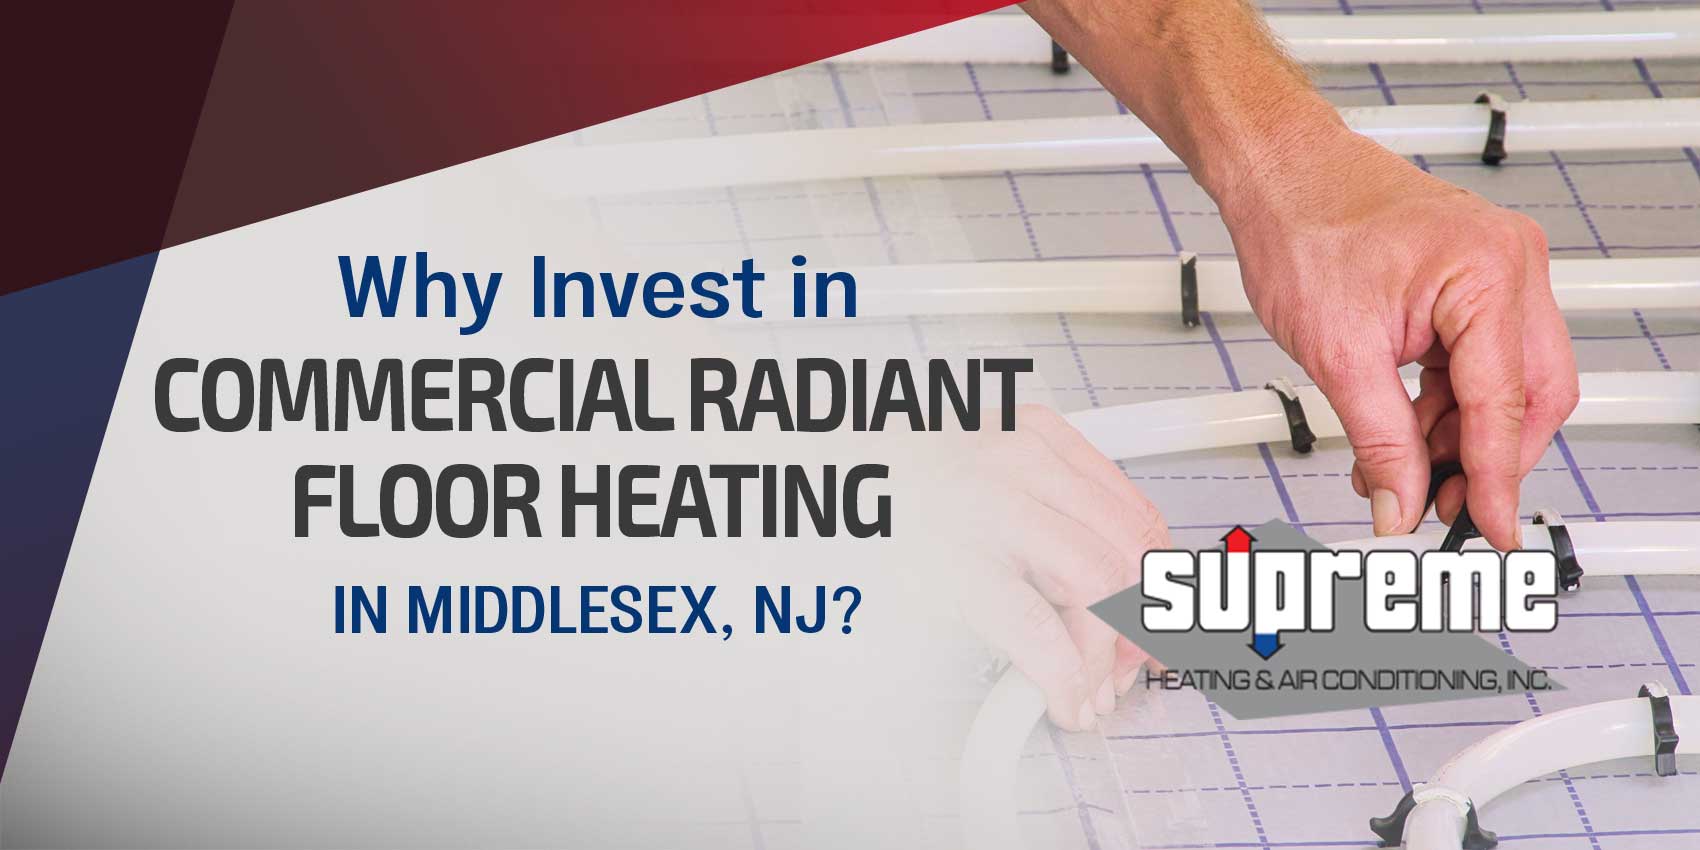 Why Invest in Commercial Radiant Floor Heating in Middlesex, NJ?